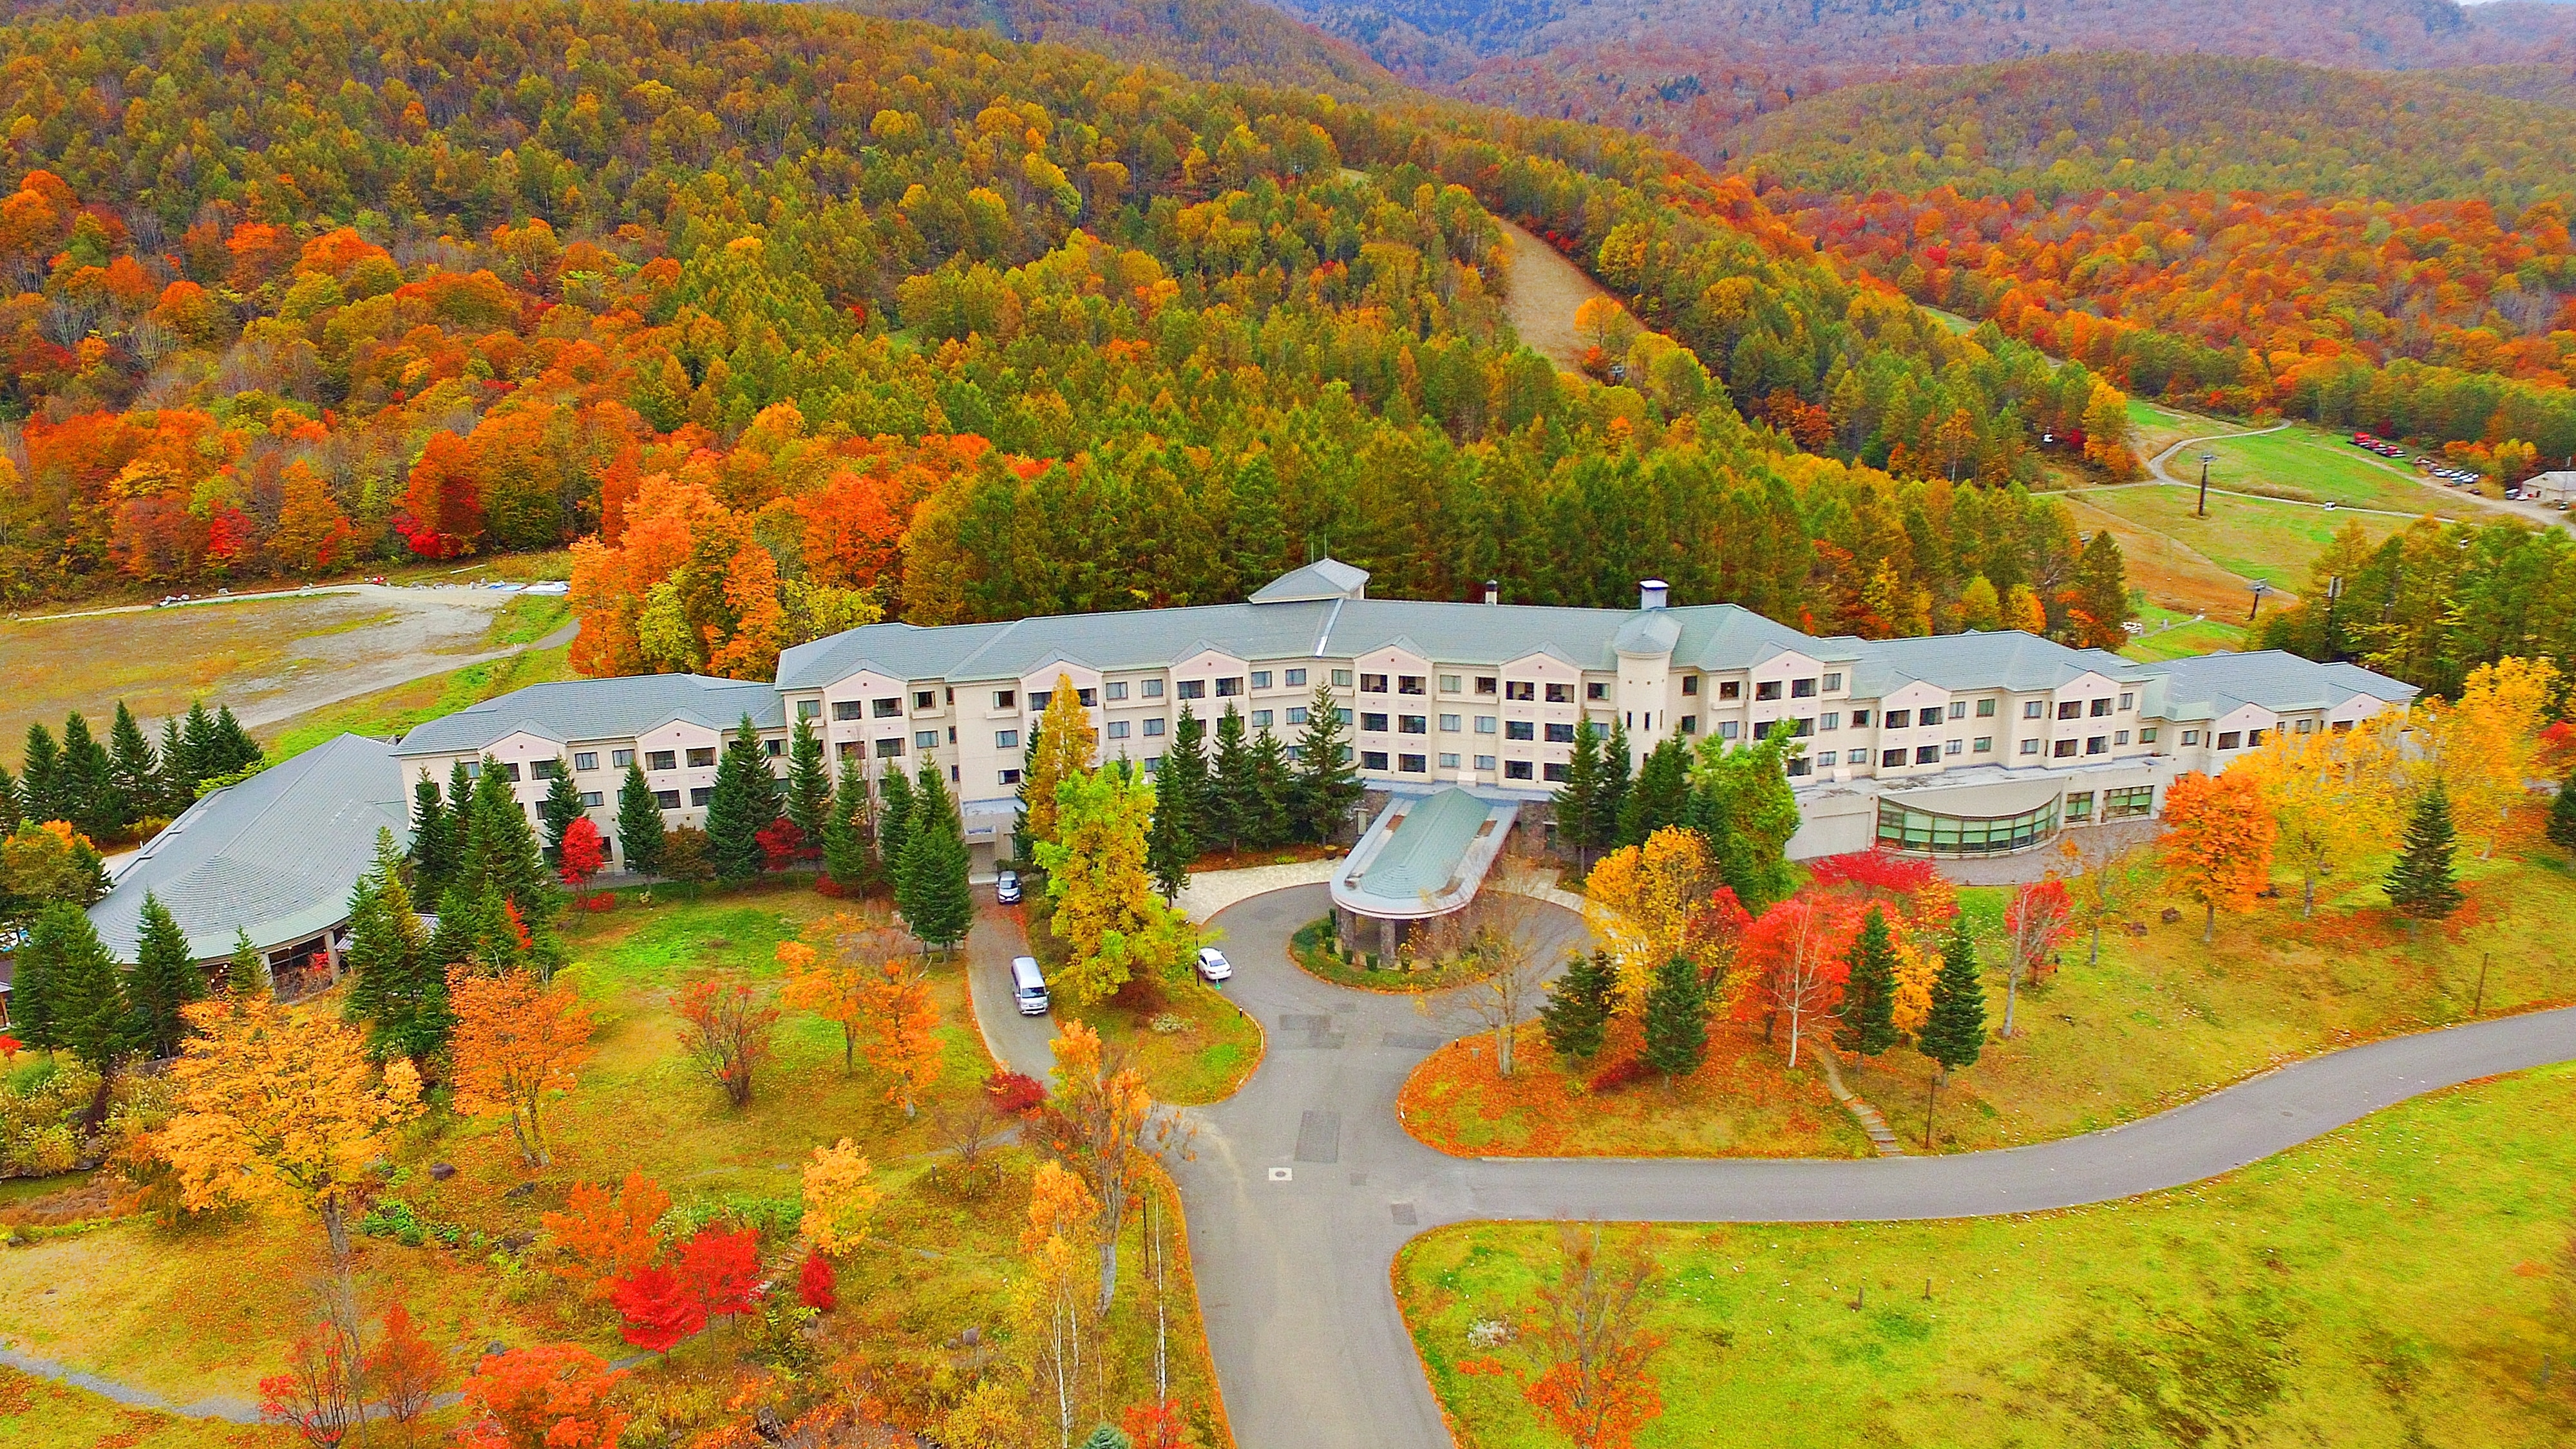 [Exterior] A brightly dyed autumn hotel